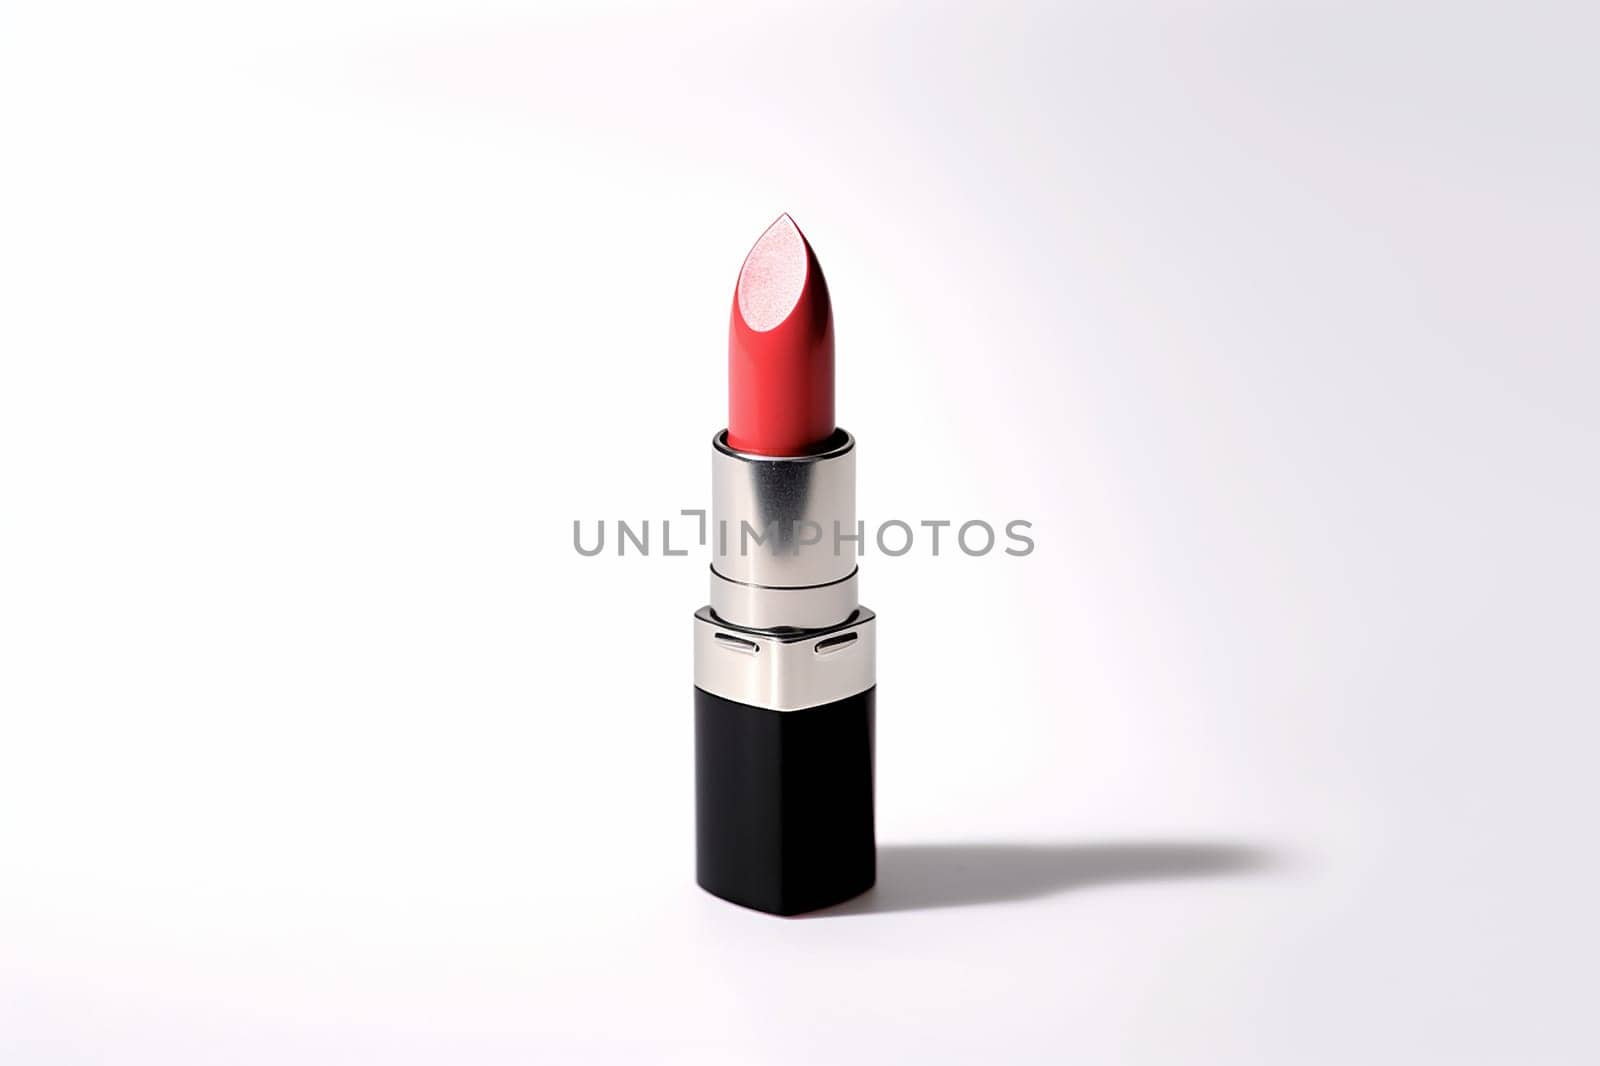 Classic red lipstick in sleek black tube on white background. by Hype2art